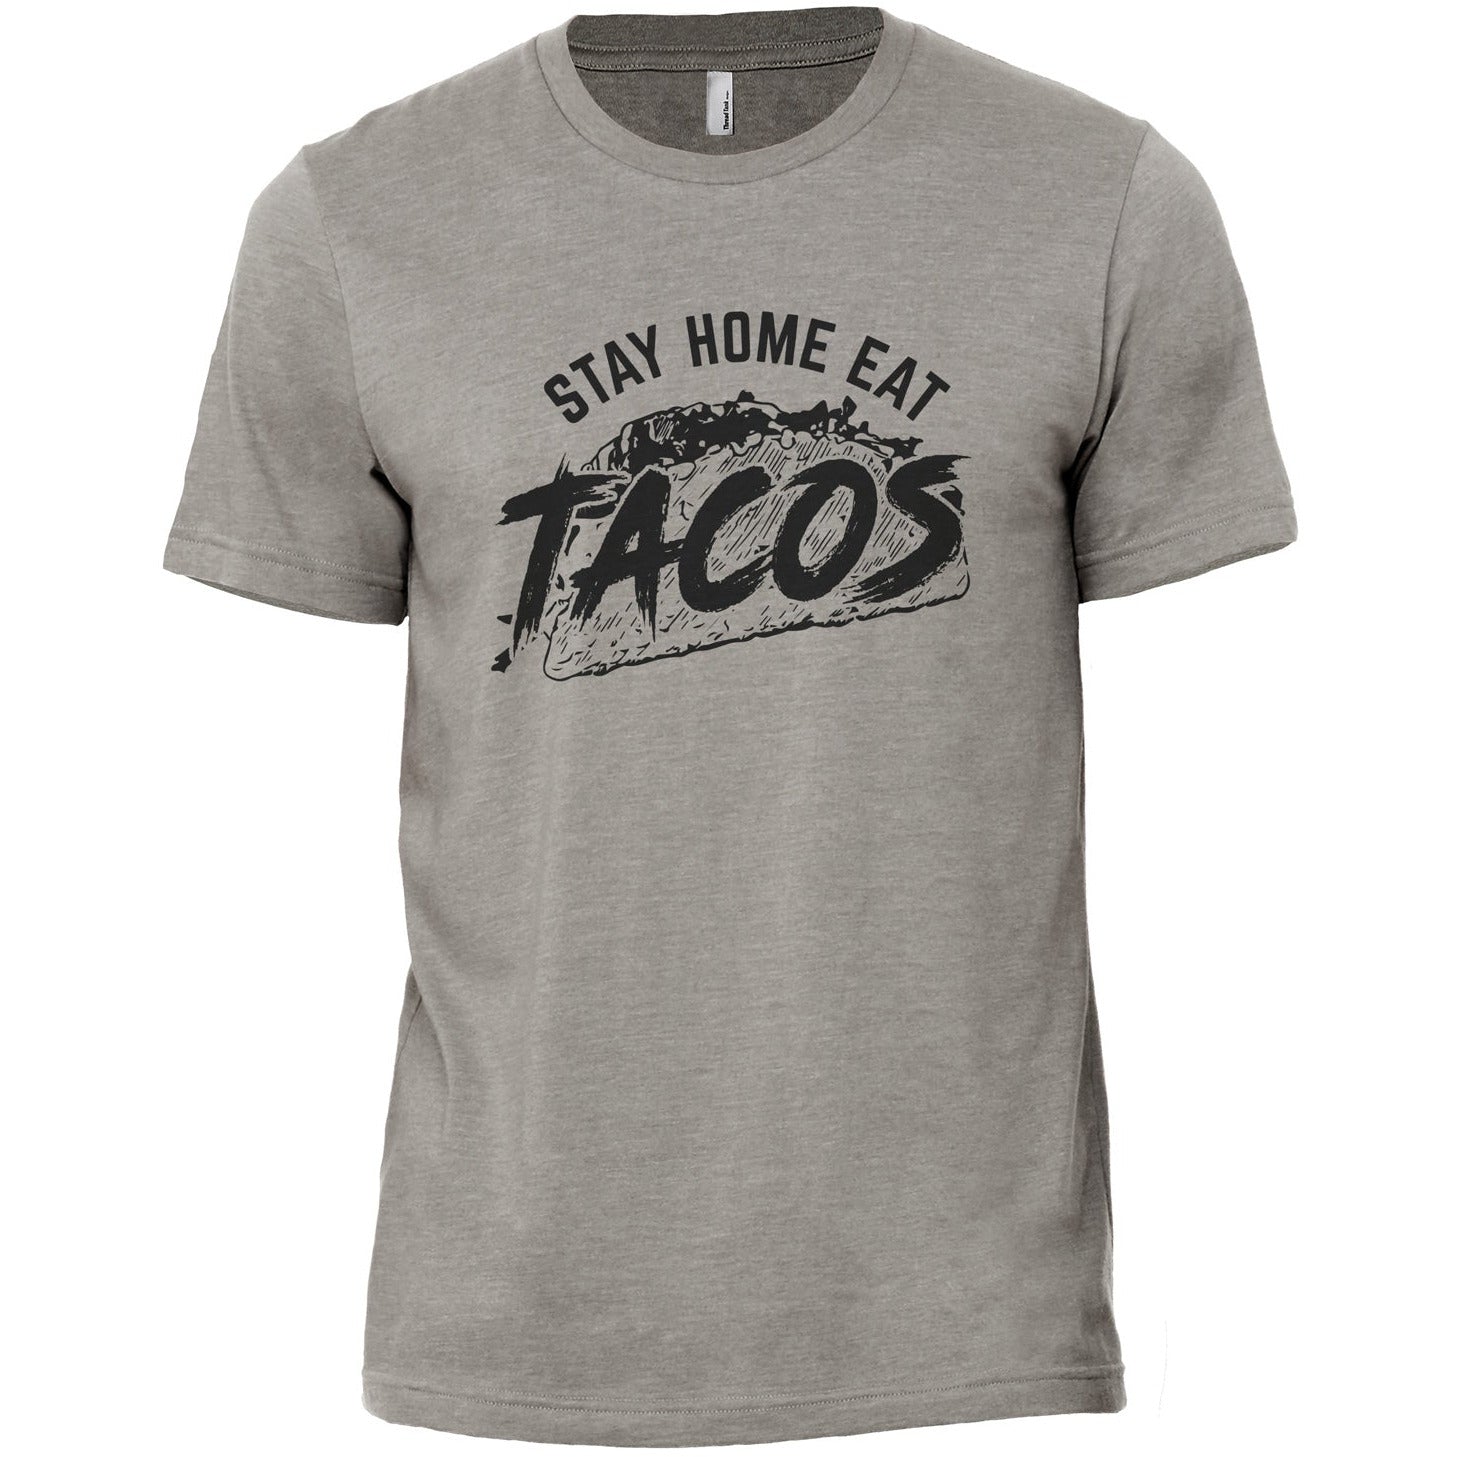 Stay Home Eat Taco - Stories You Can Wear